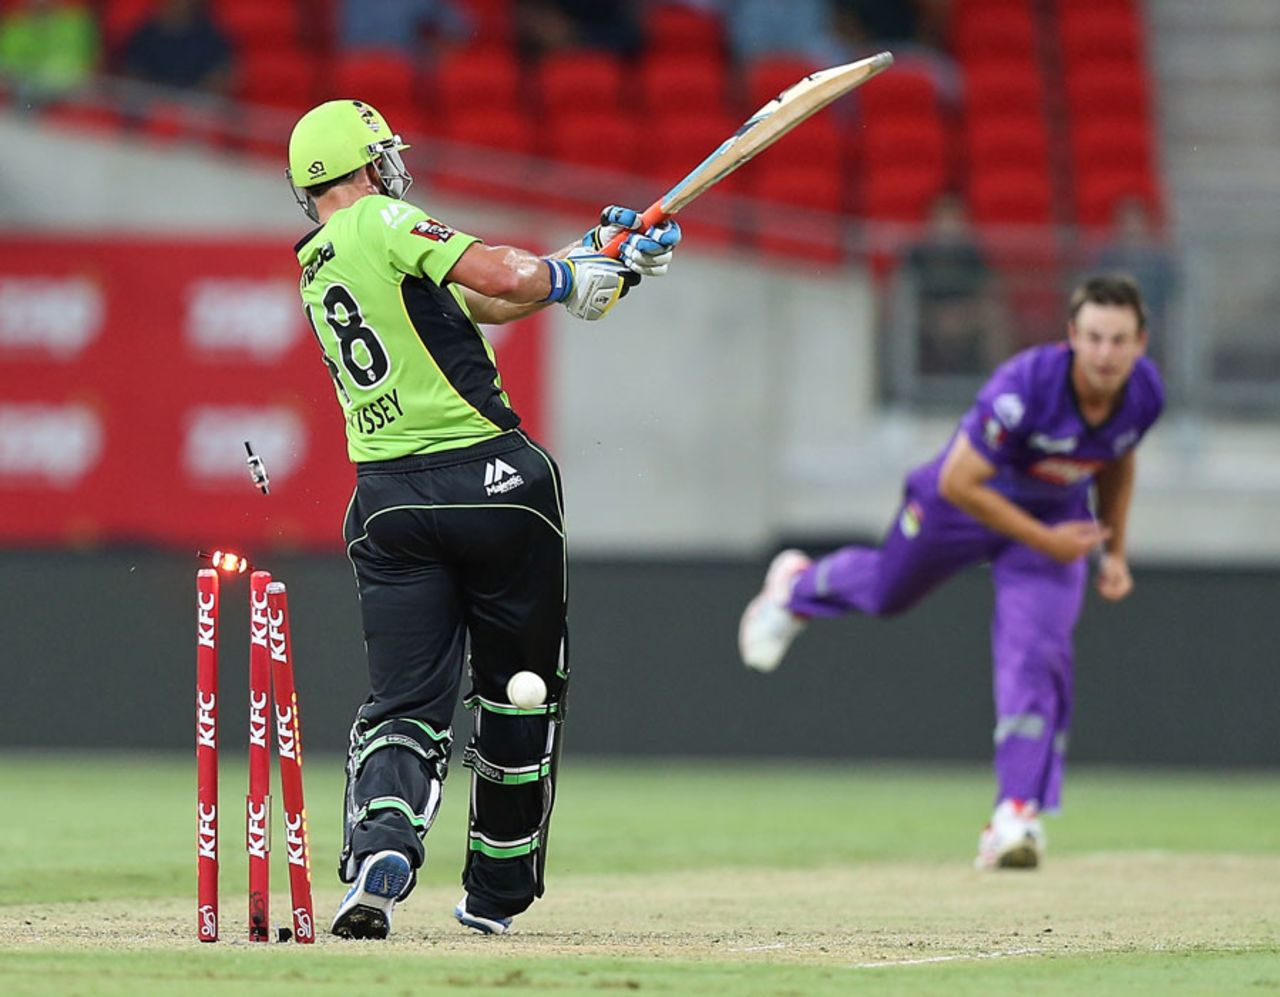 Michael Hussey was bowled by Evan Gulbis for 9, Sydney Thunder v Hobart Hurricanes, Big Bash League 2014-15, Sydney, January 9, 2015